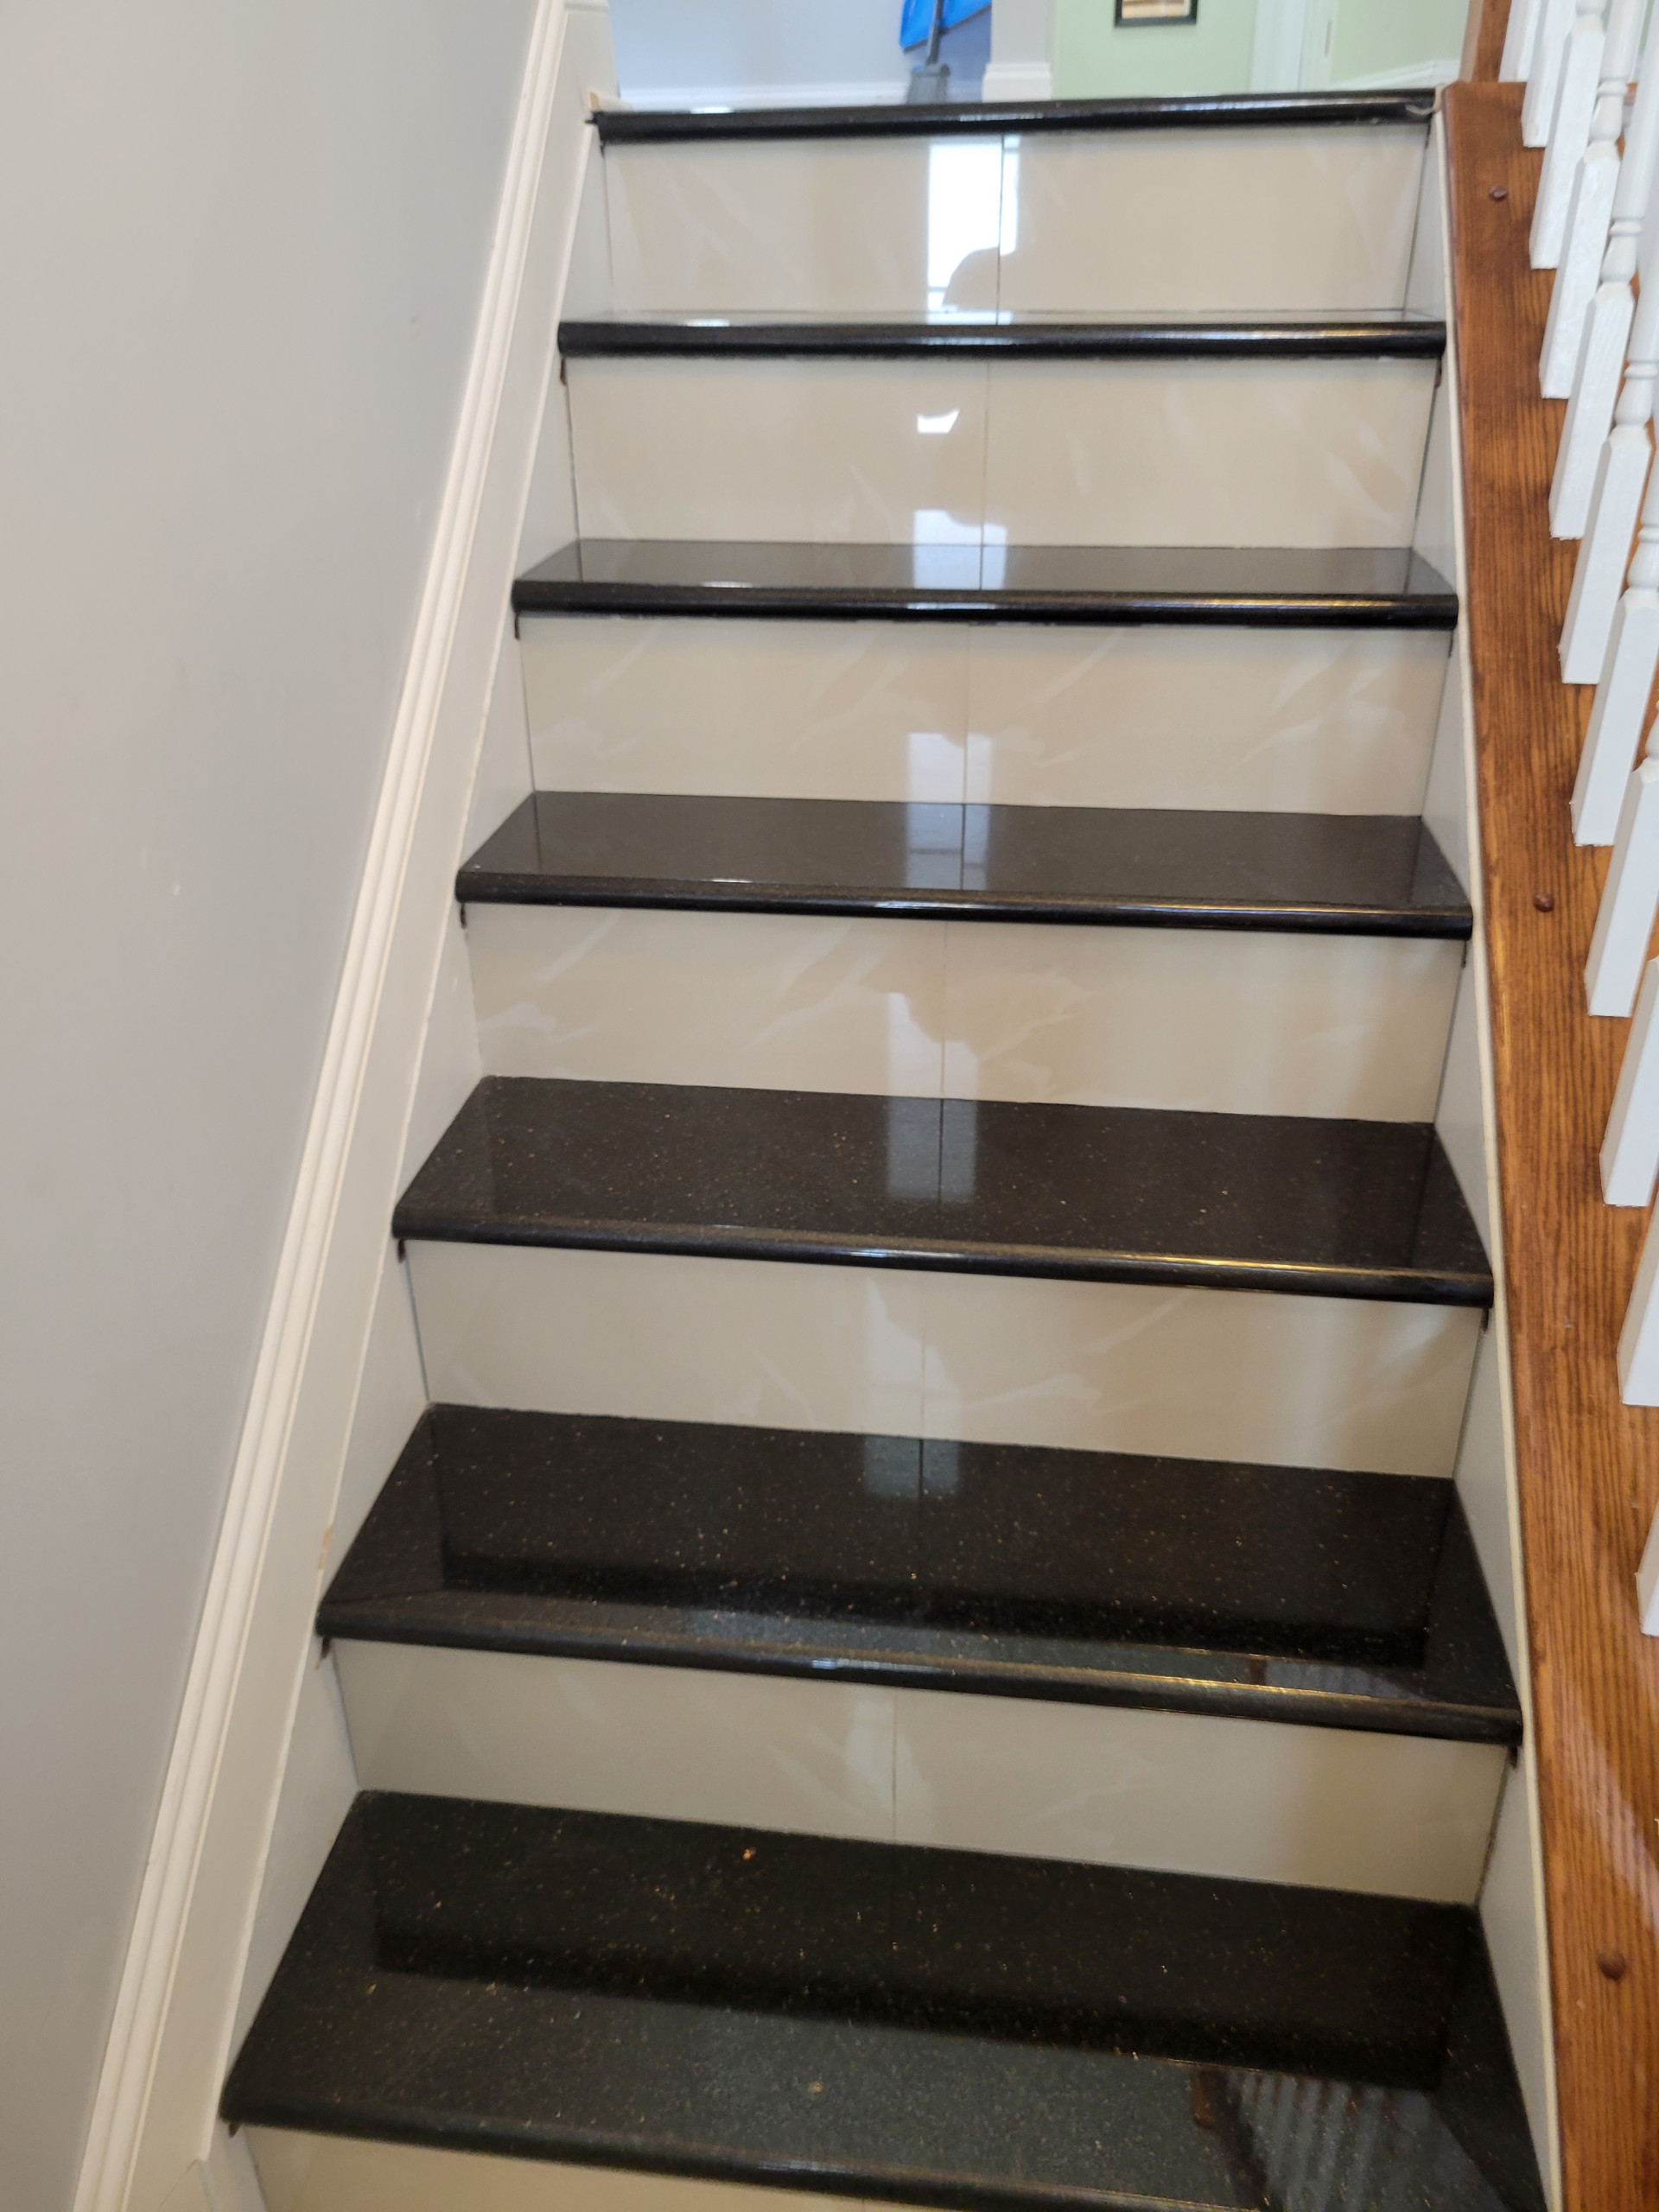 Tile with granite steps, New Idea